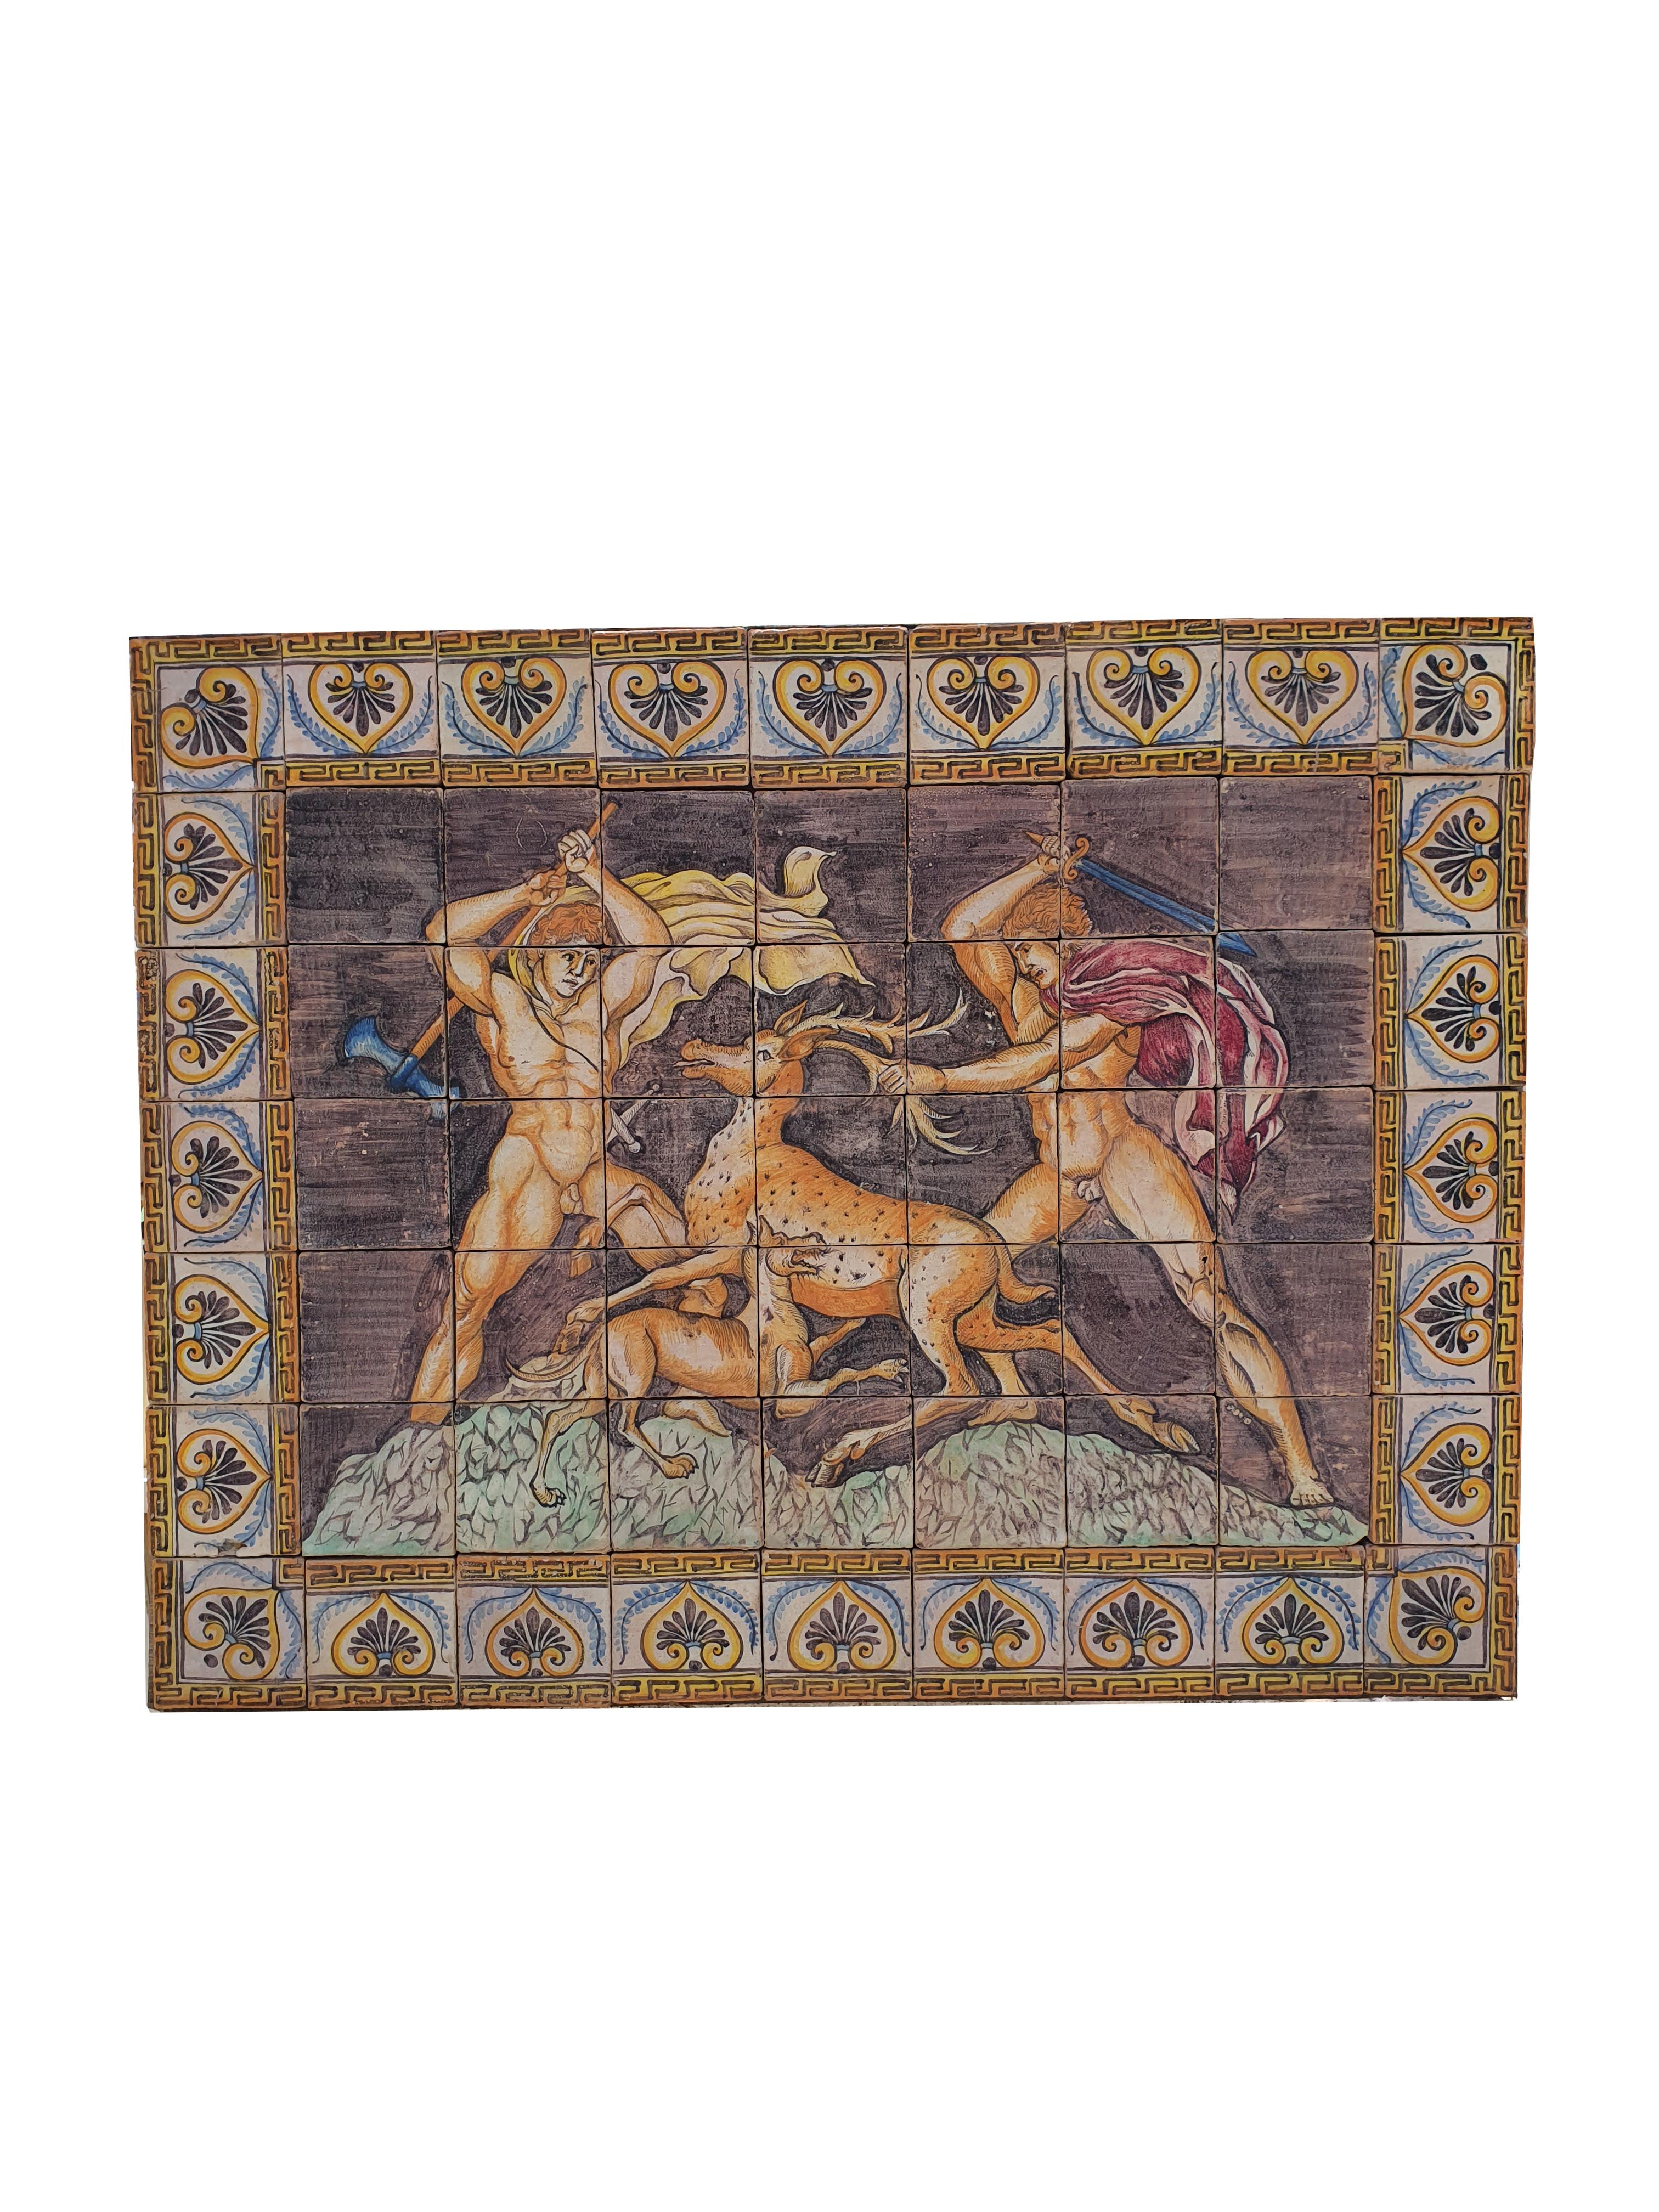 20th Cetury Sicilian Painted Majolica Panel For Sale 1